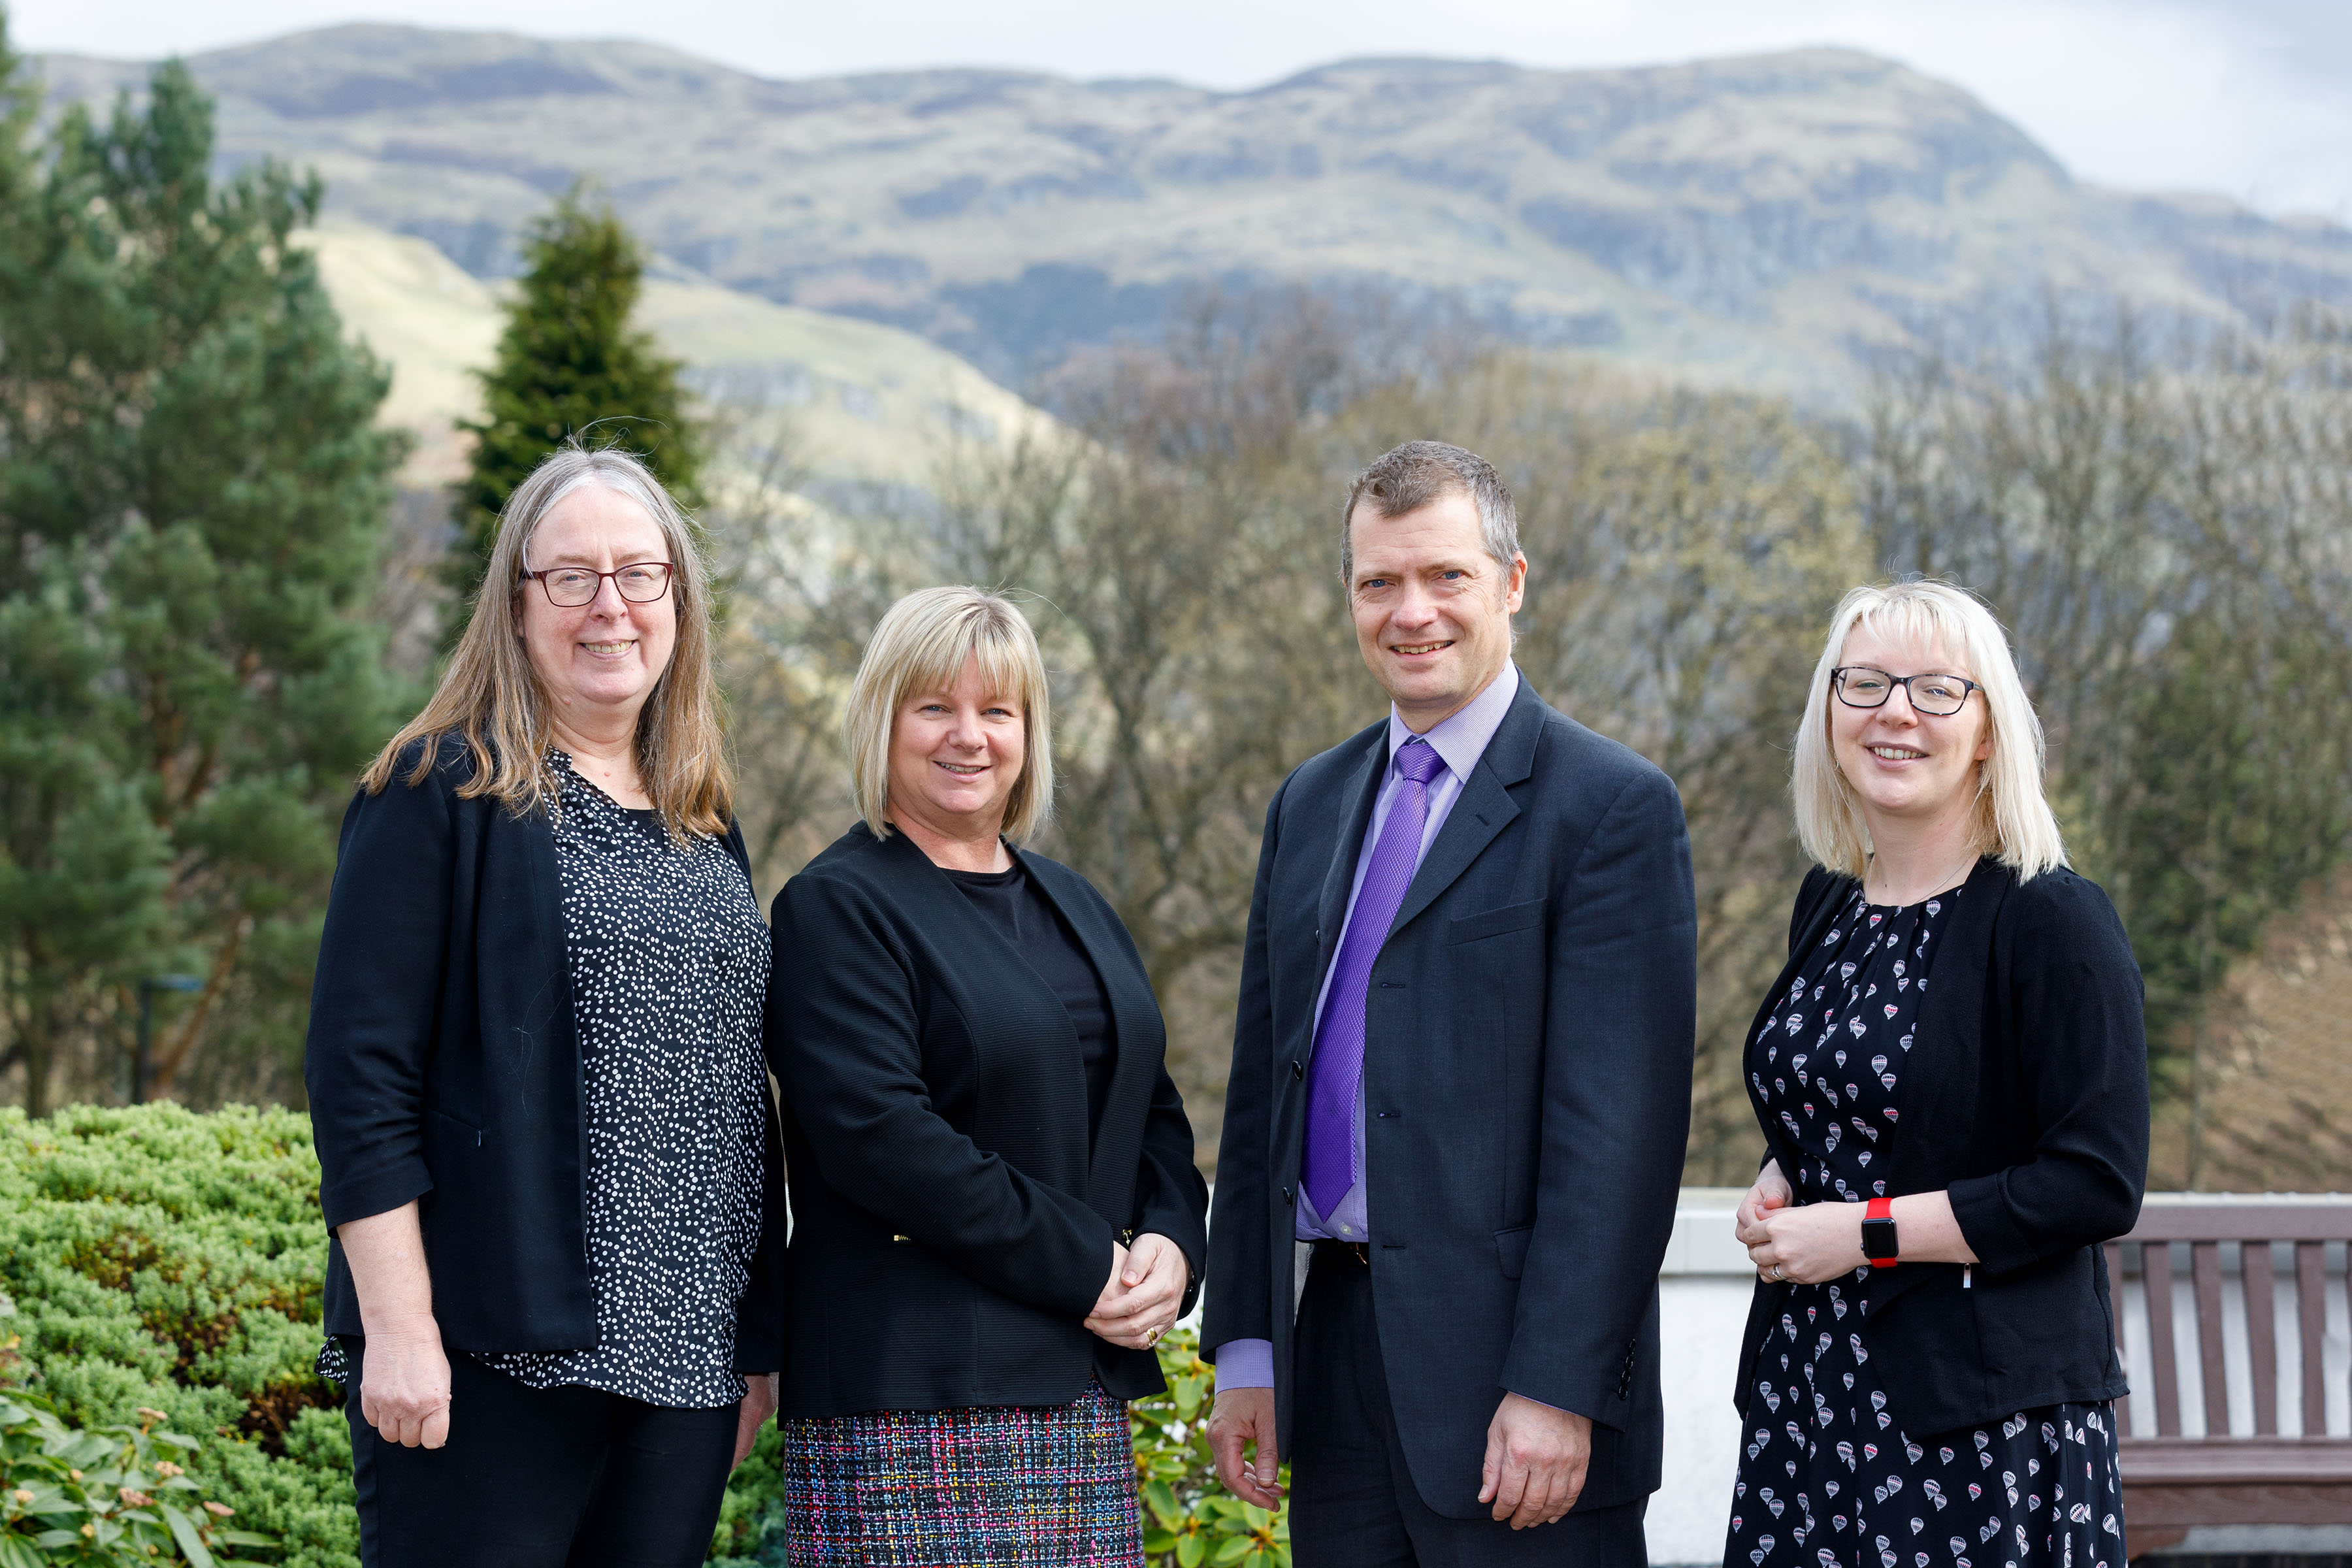 Shadow housing minster meets Stirling housing and ageing experts